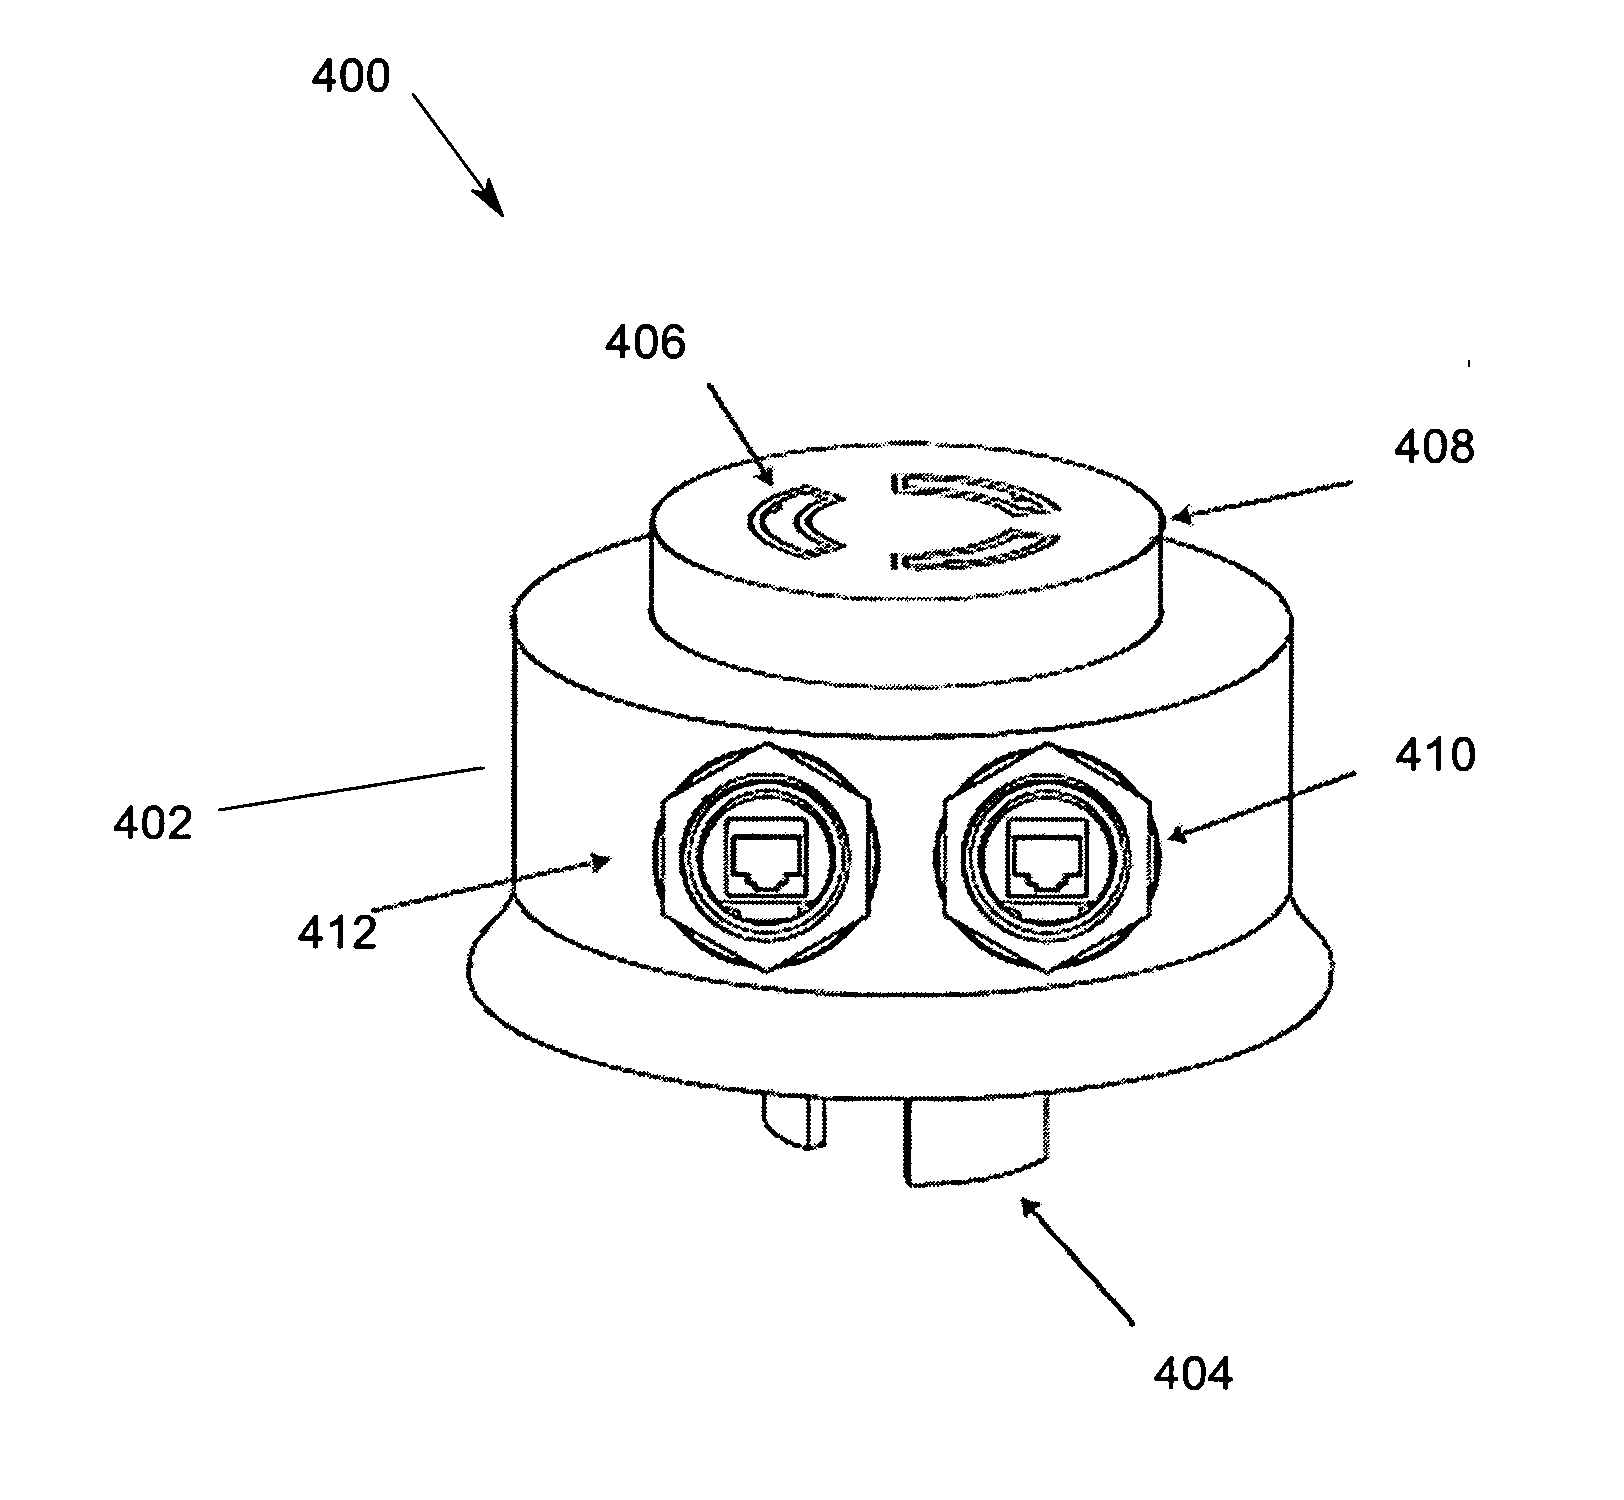 Power-over-Ethernet sourcing device with input-power pass through